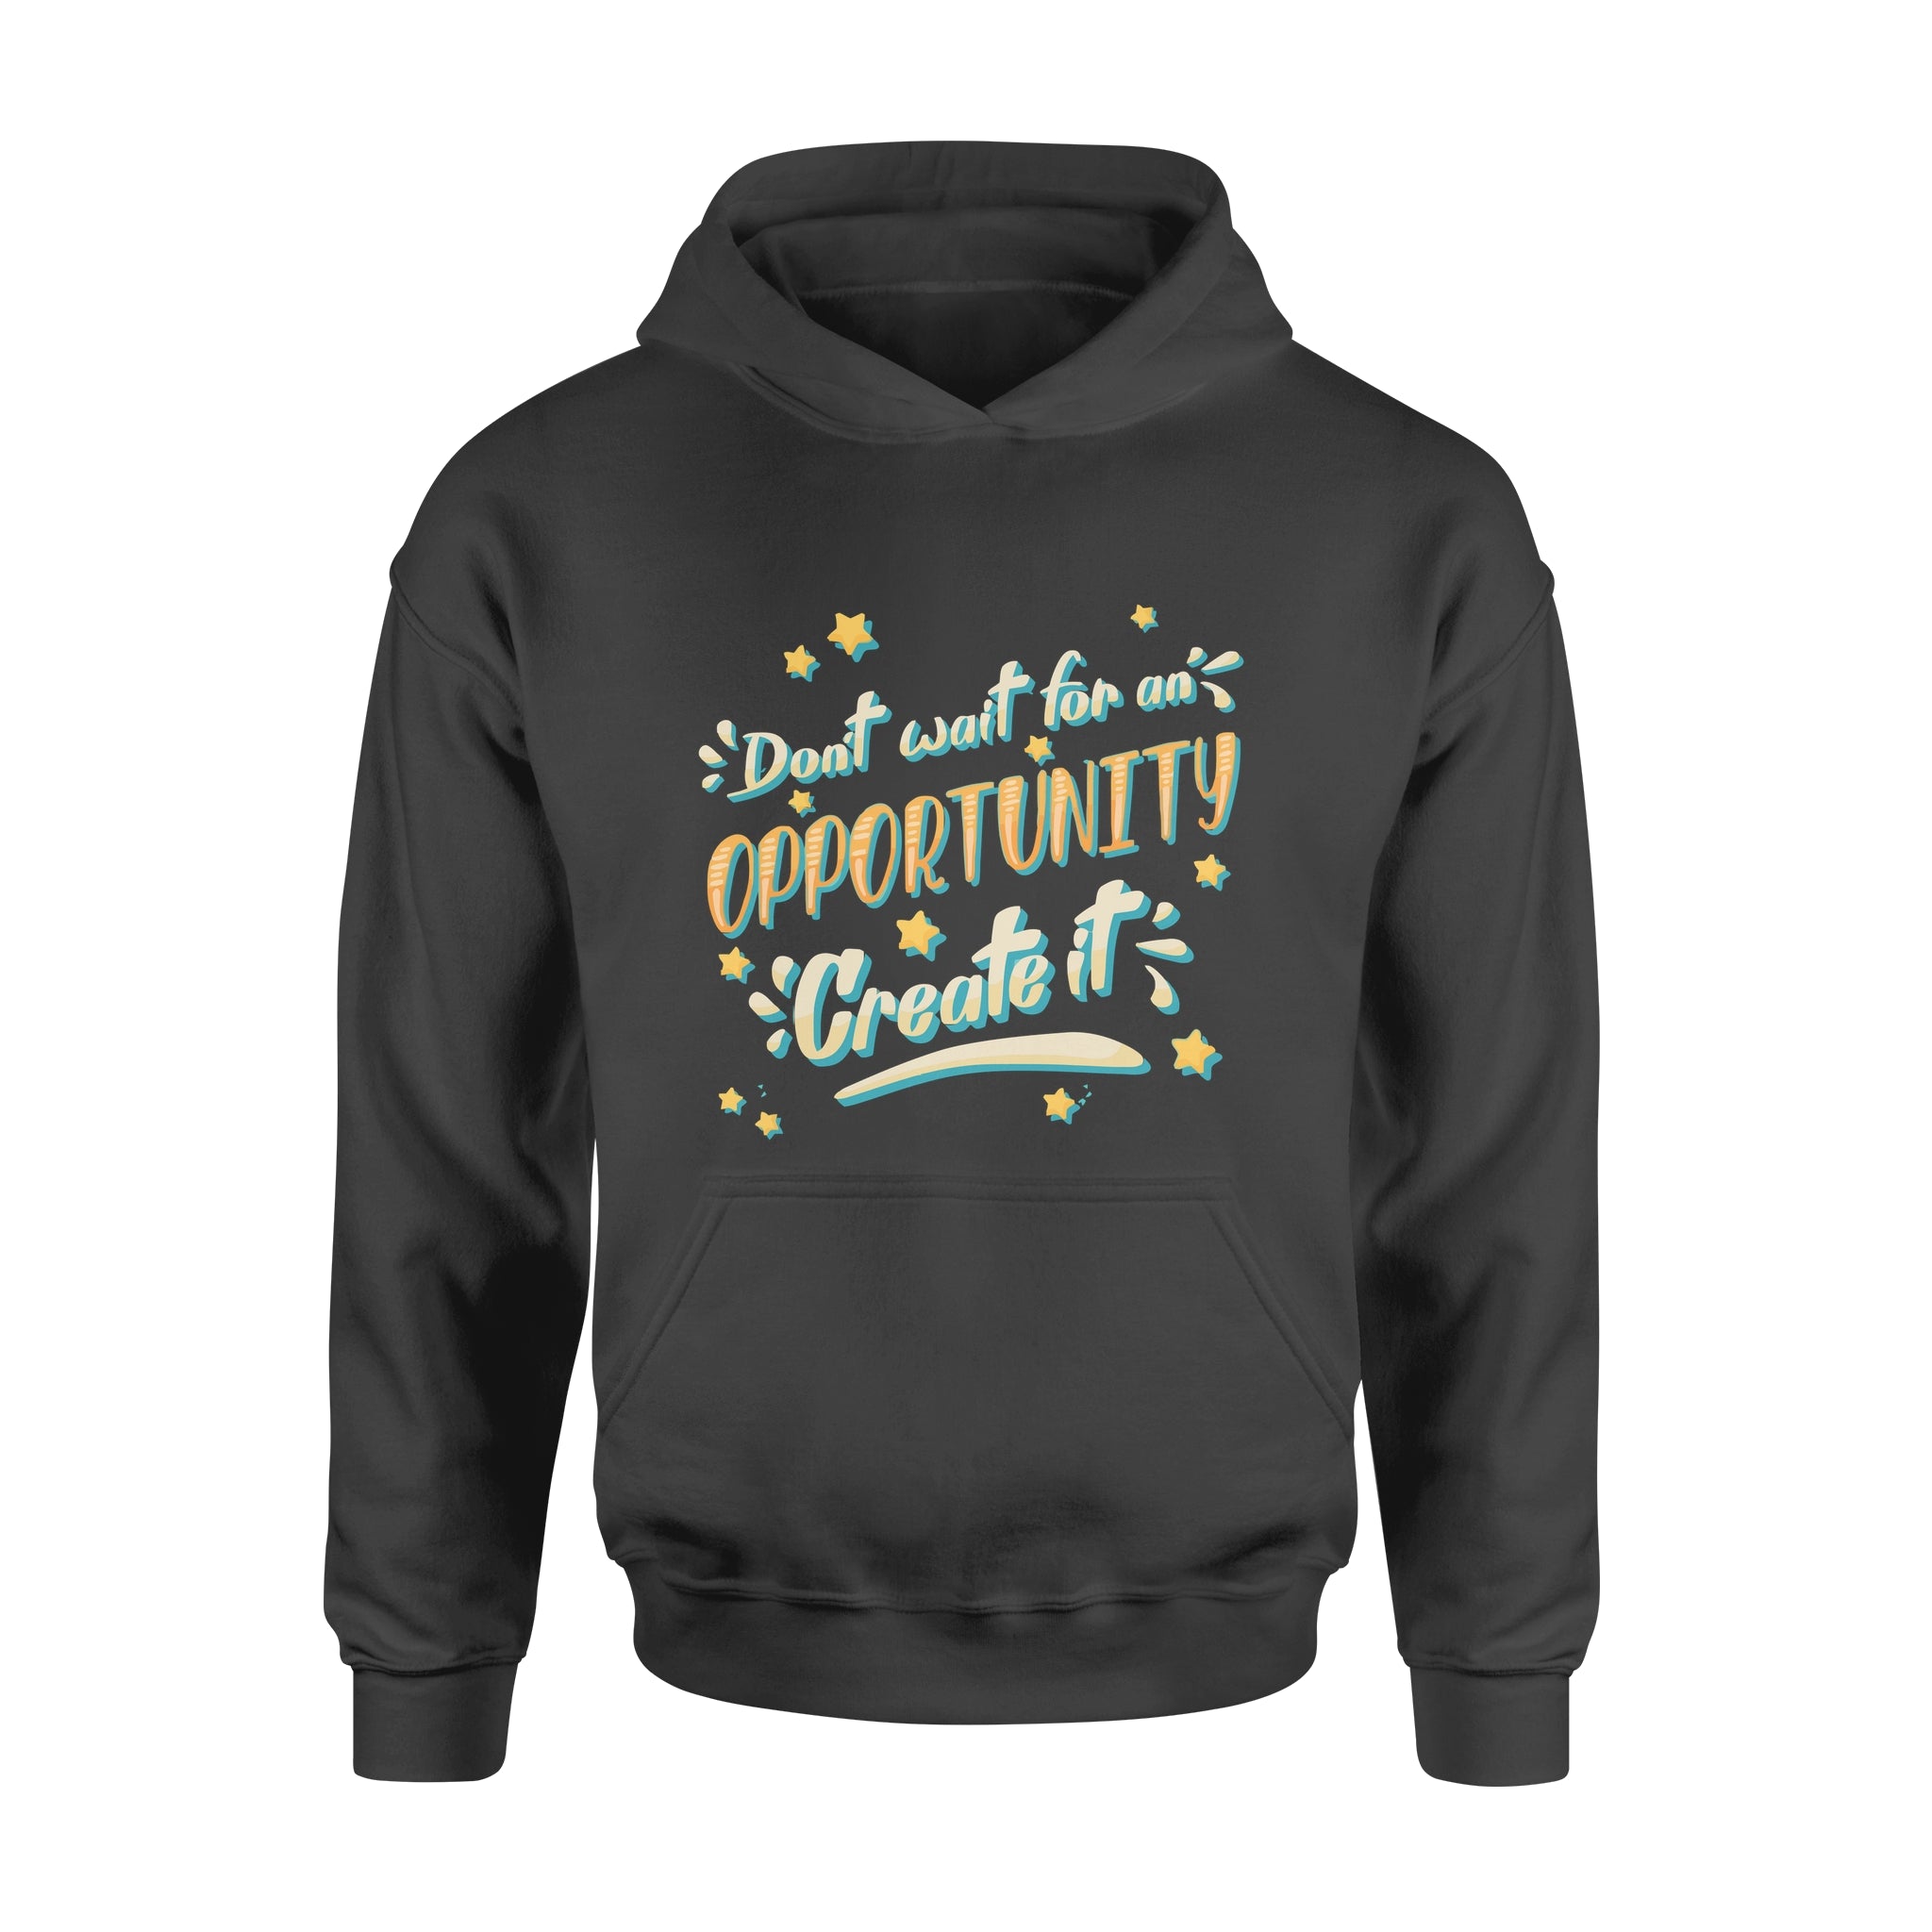 Don't Wait For An Oppoptunity Create It - Hoodie